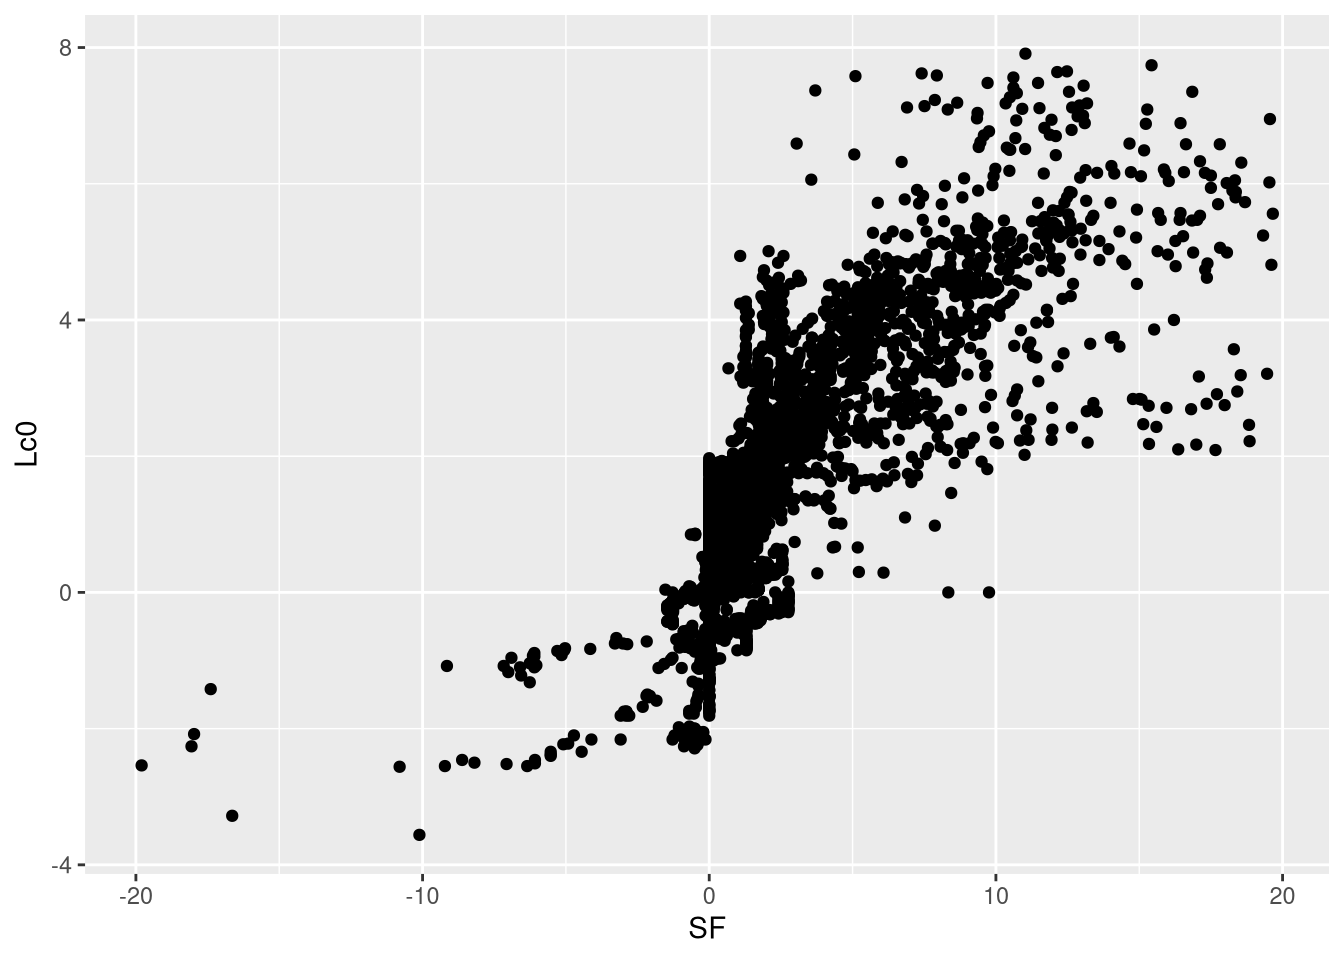 Plot of Leela's evaluations against Stockfish's evaluations